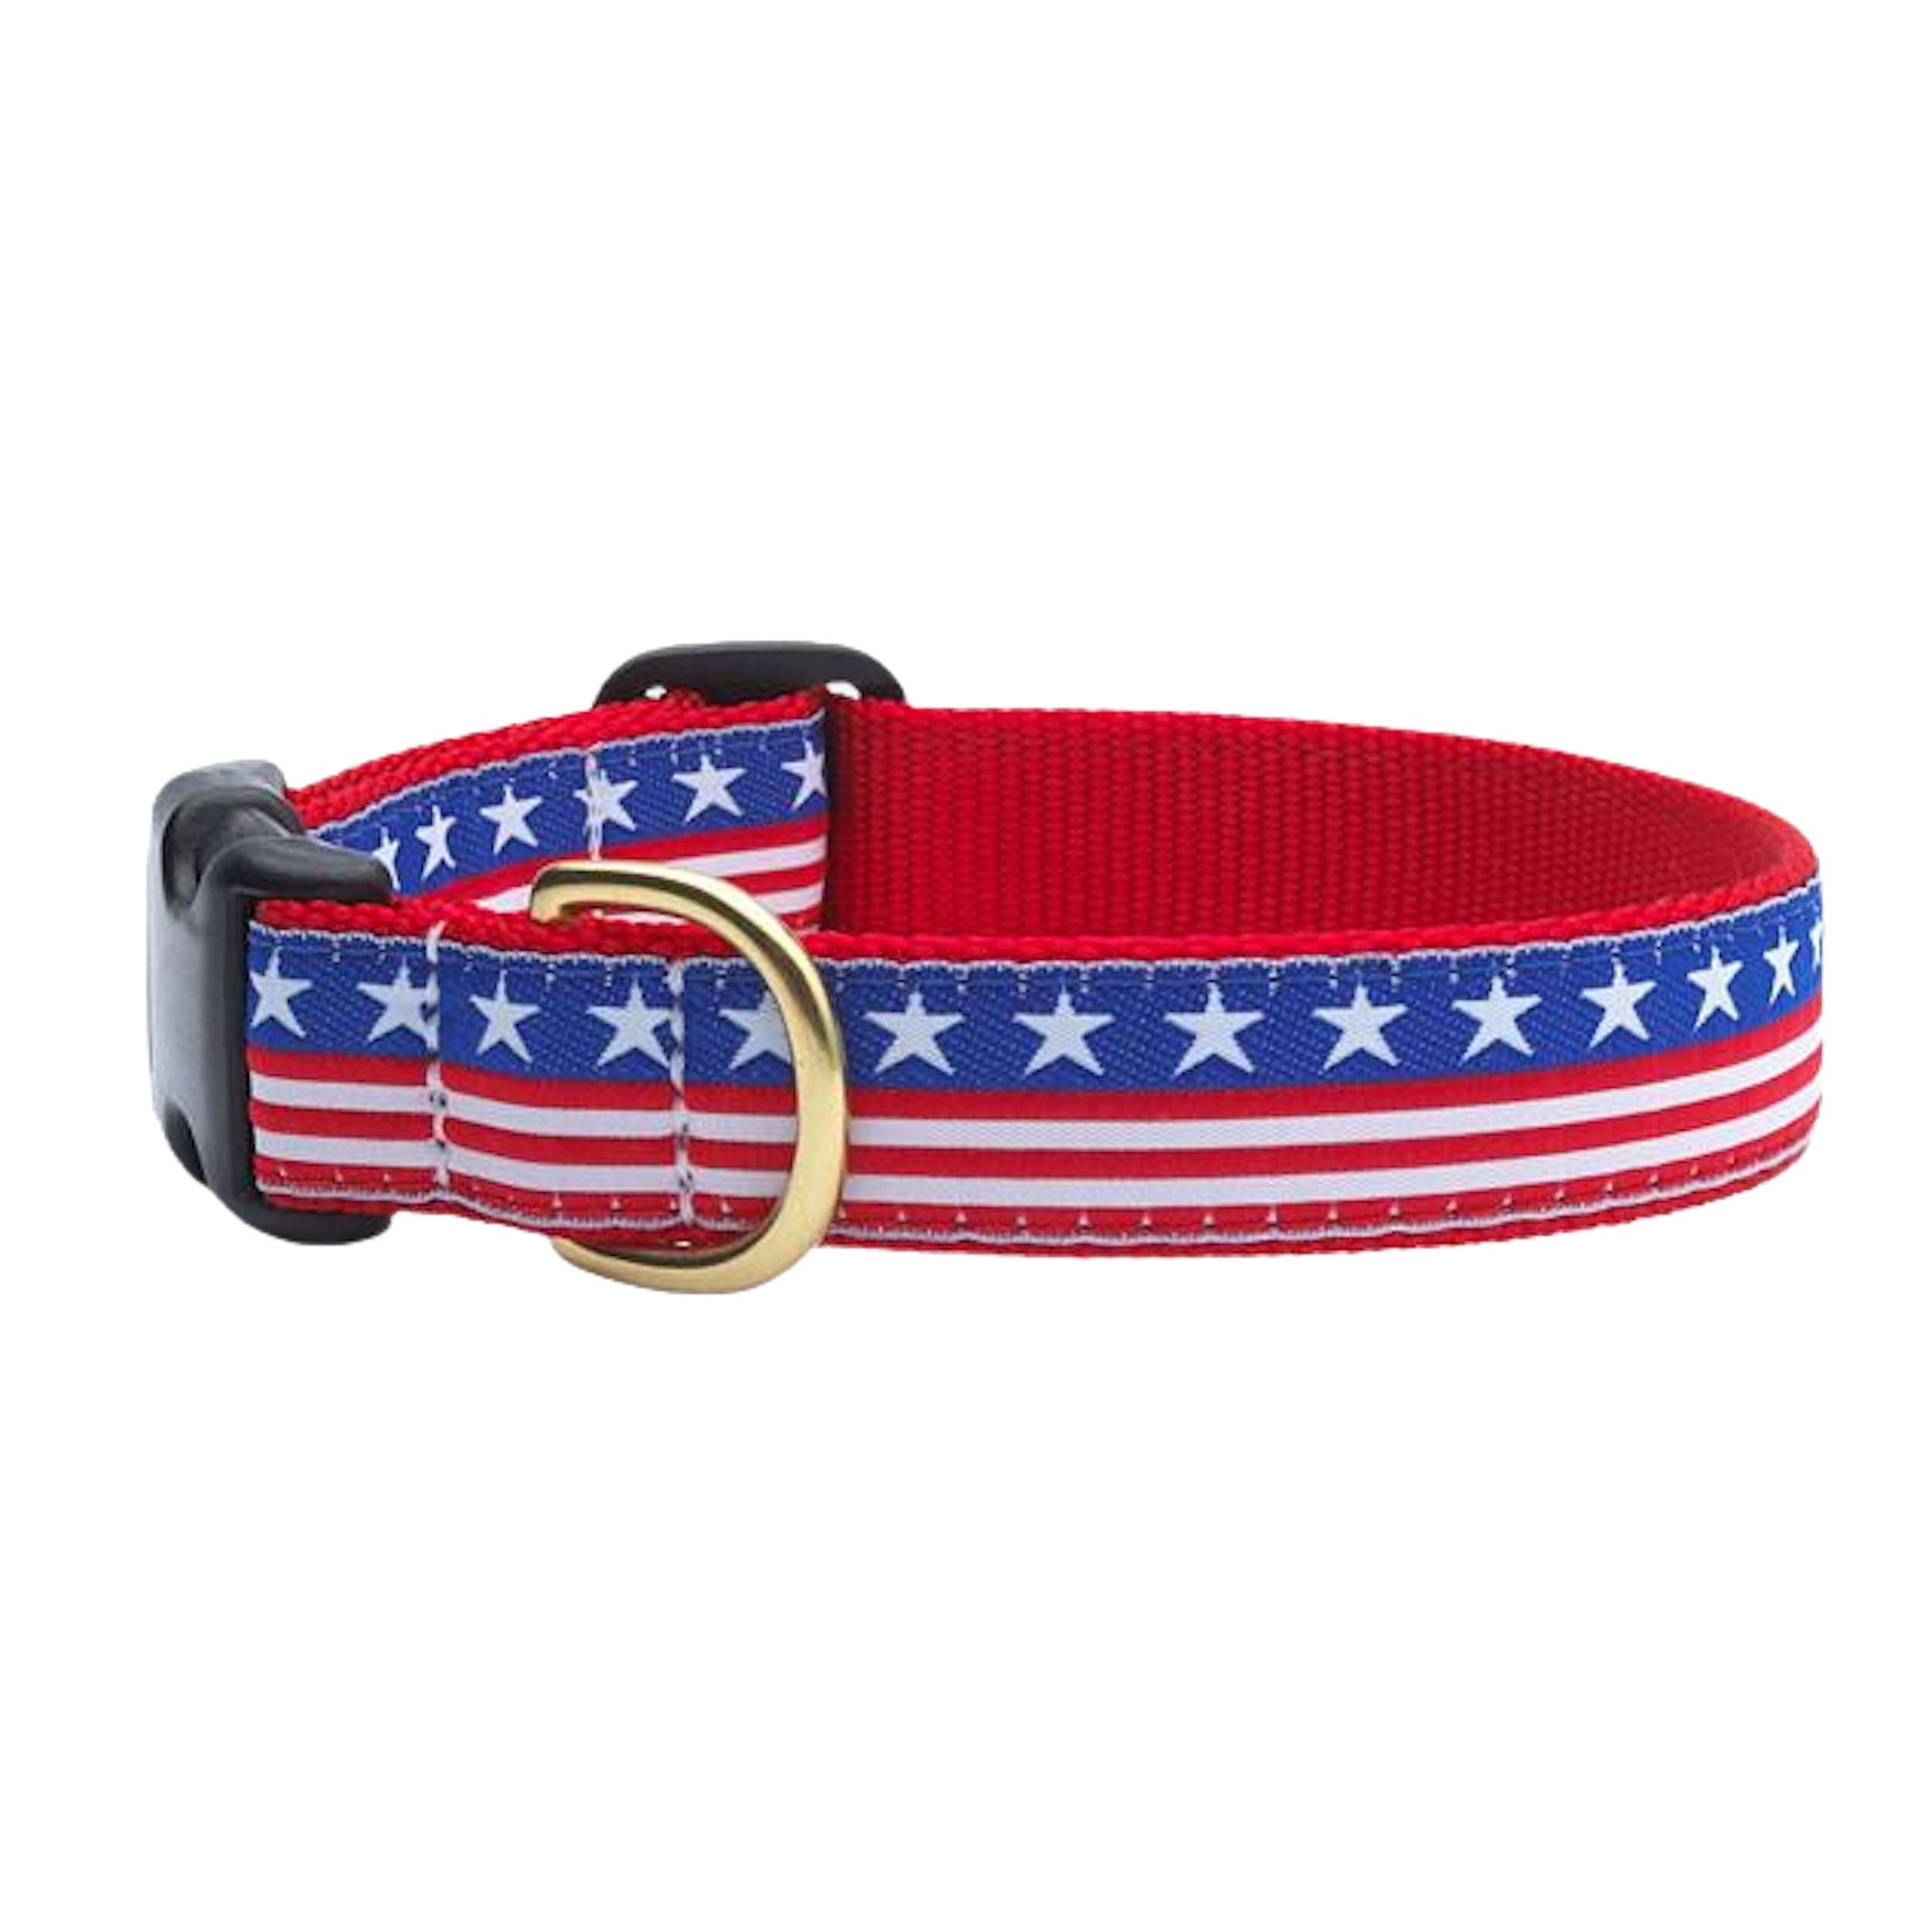 STARS-STRIPES-INDEPENDENCE-DAY-DOG-COLLAR